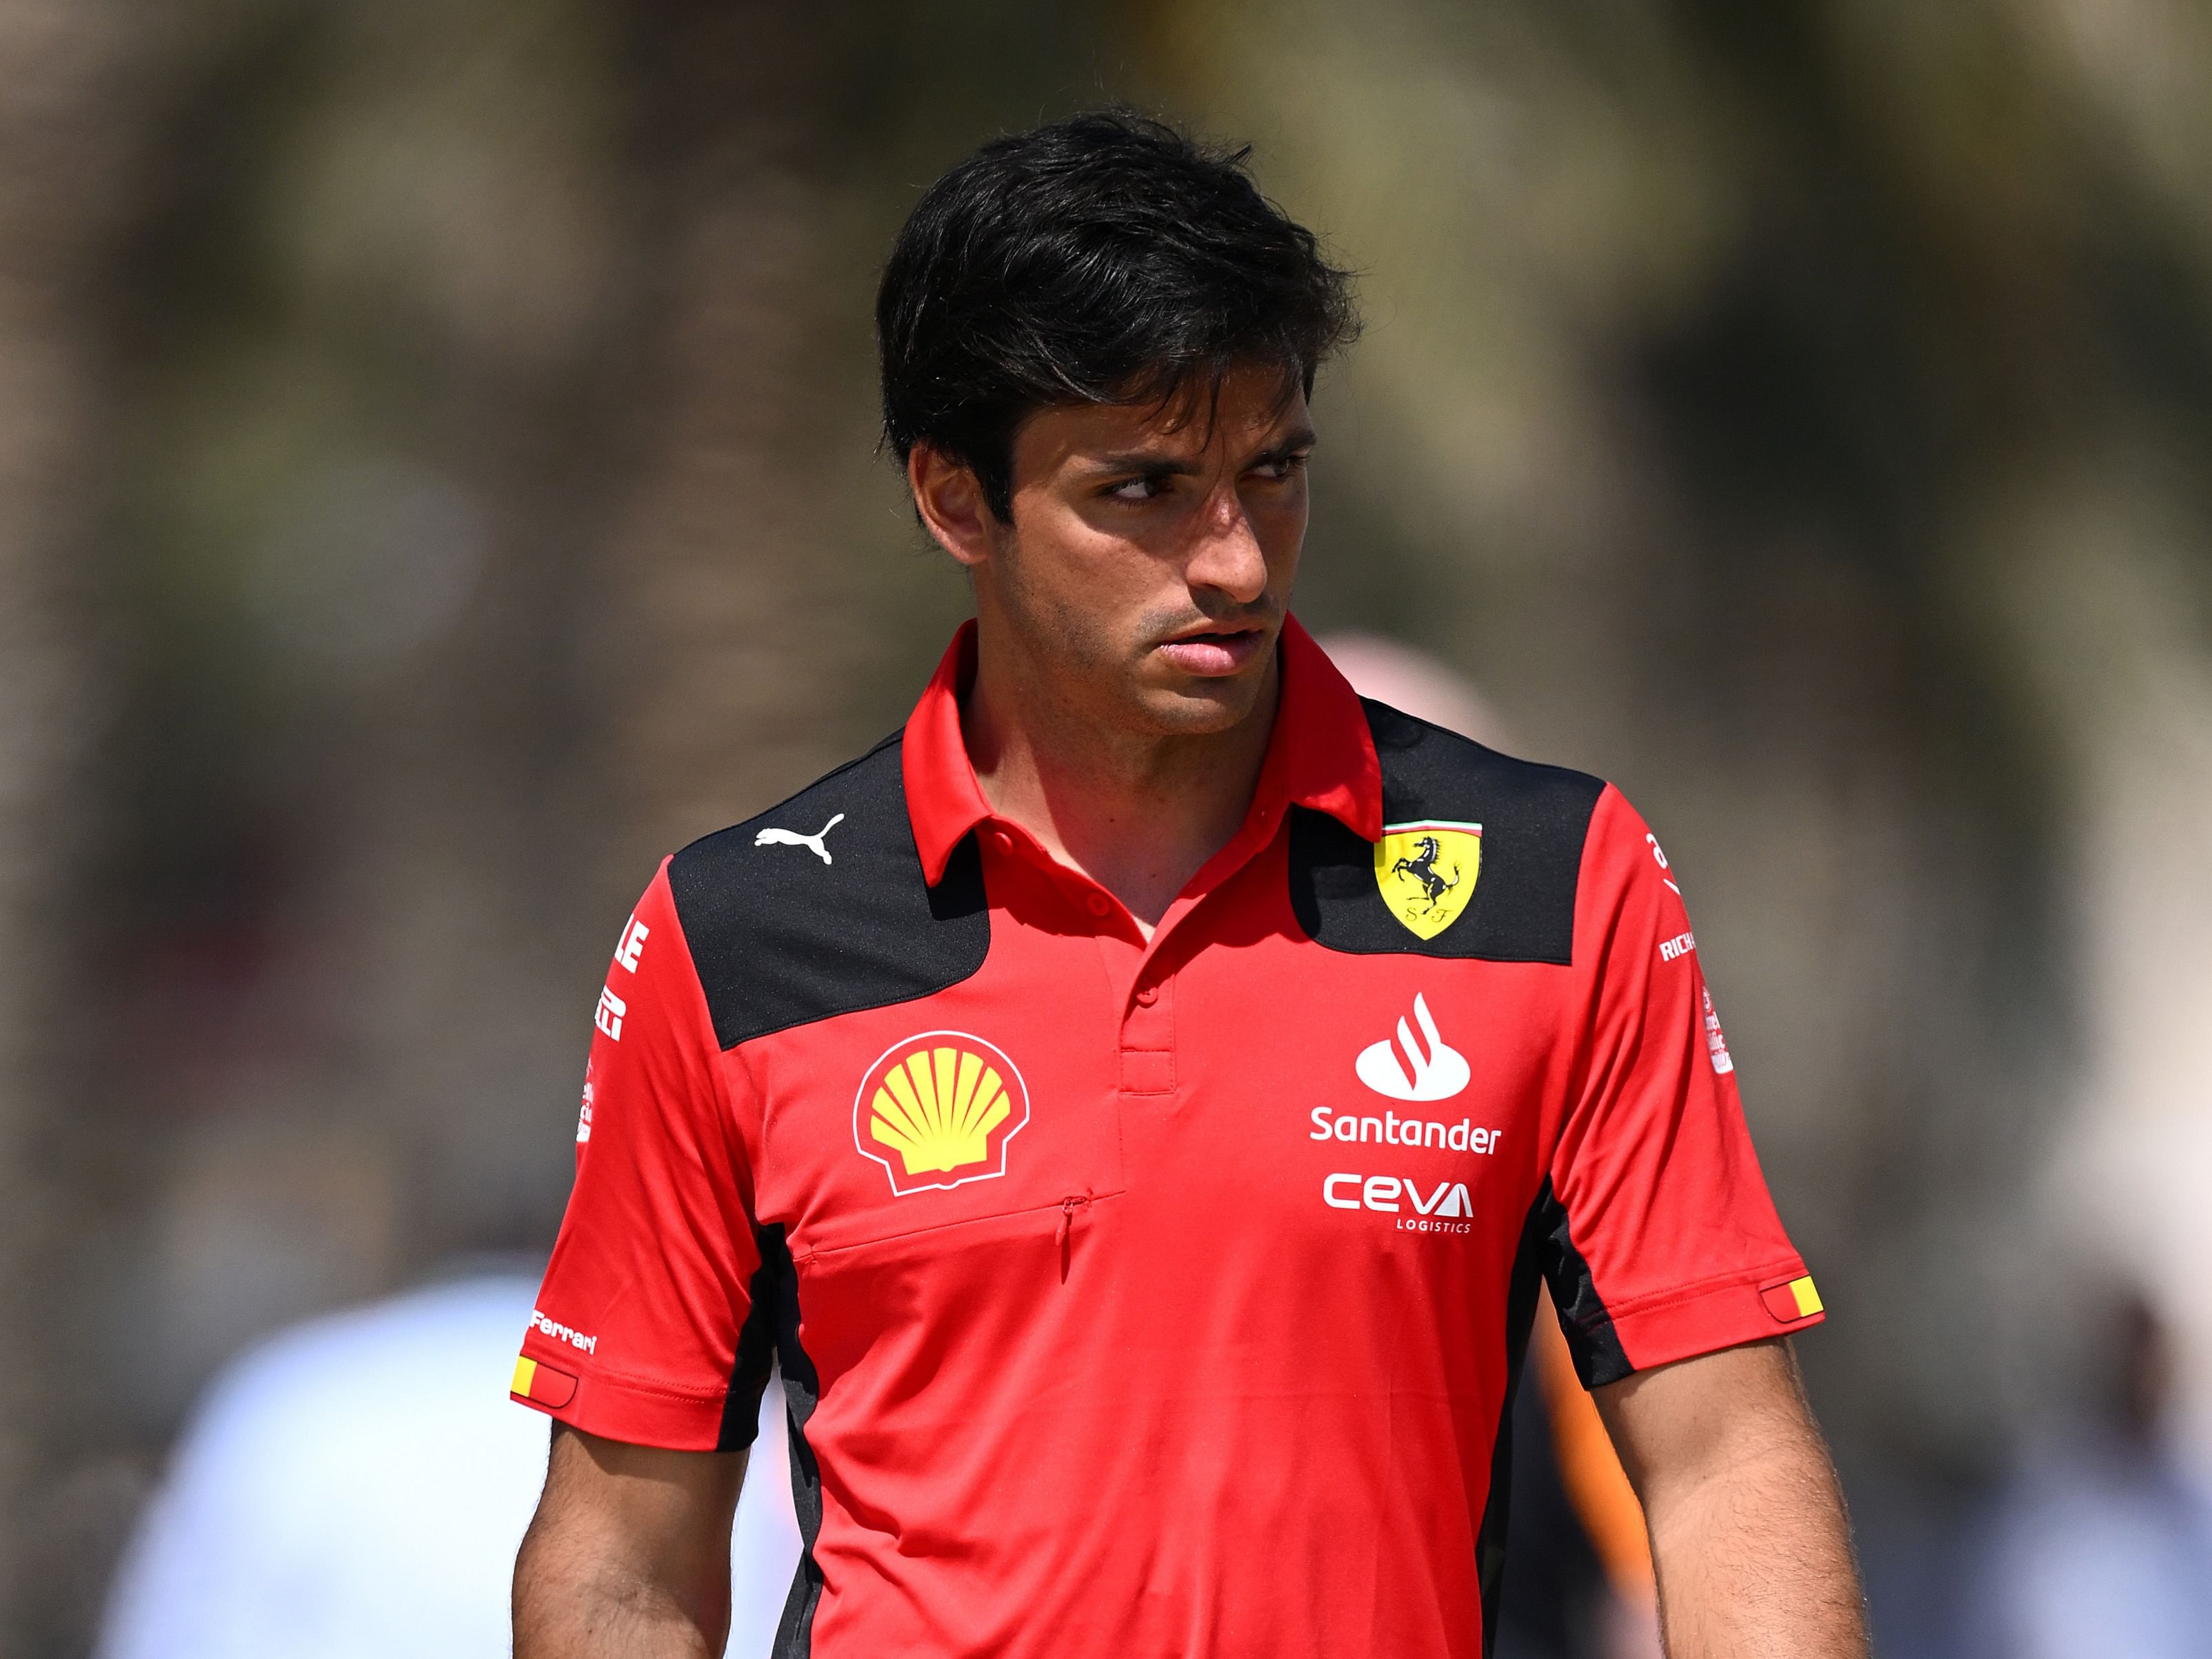 Carlos Sainz walks in the paddock prior to practice ahead of the 2023 F1 Bahrain Grand Prix (Photo by Clive Mason/Getty Images)